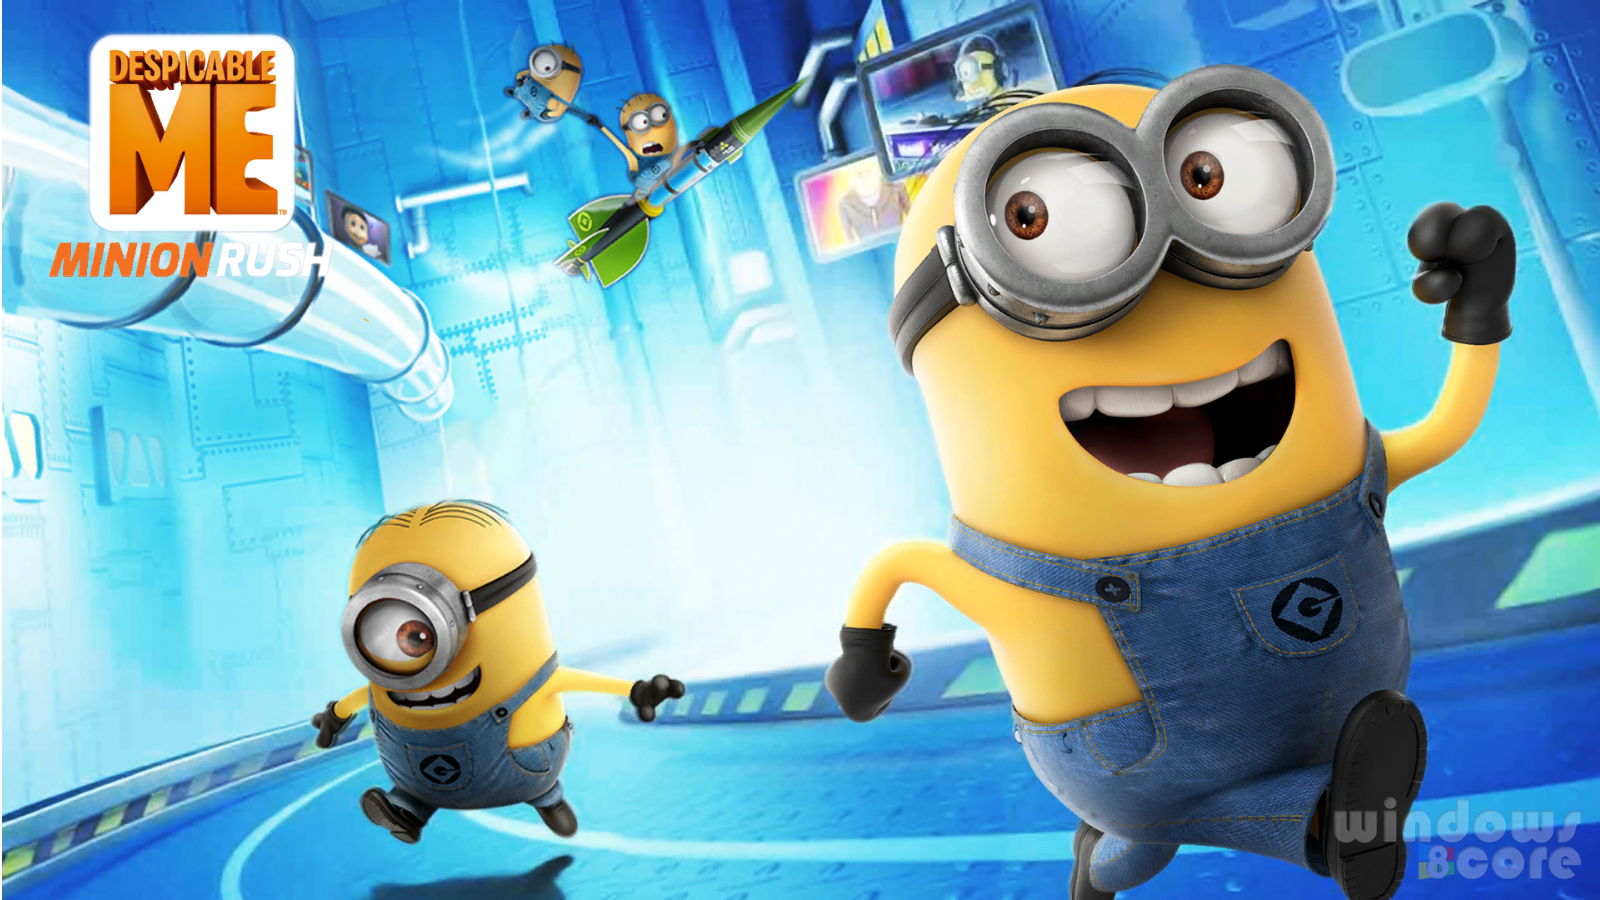 Despicable Me: Minion Rush Wallpapers - Wallpaper Cave